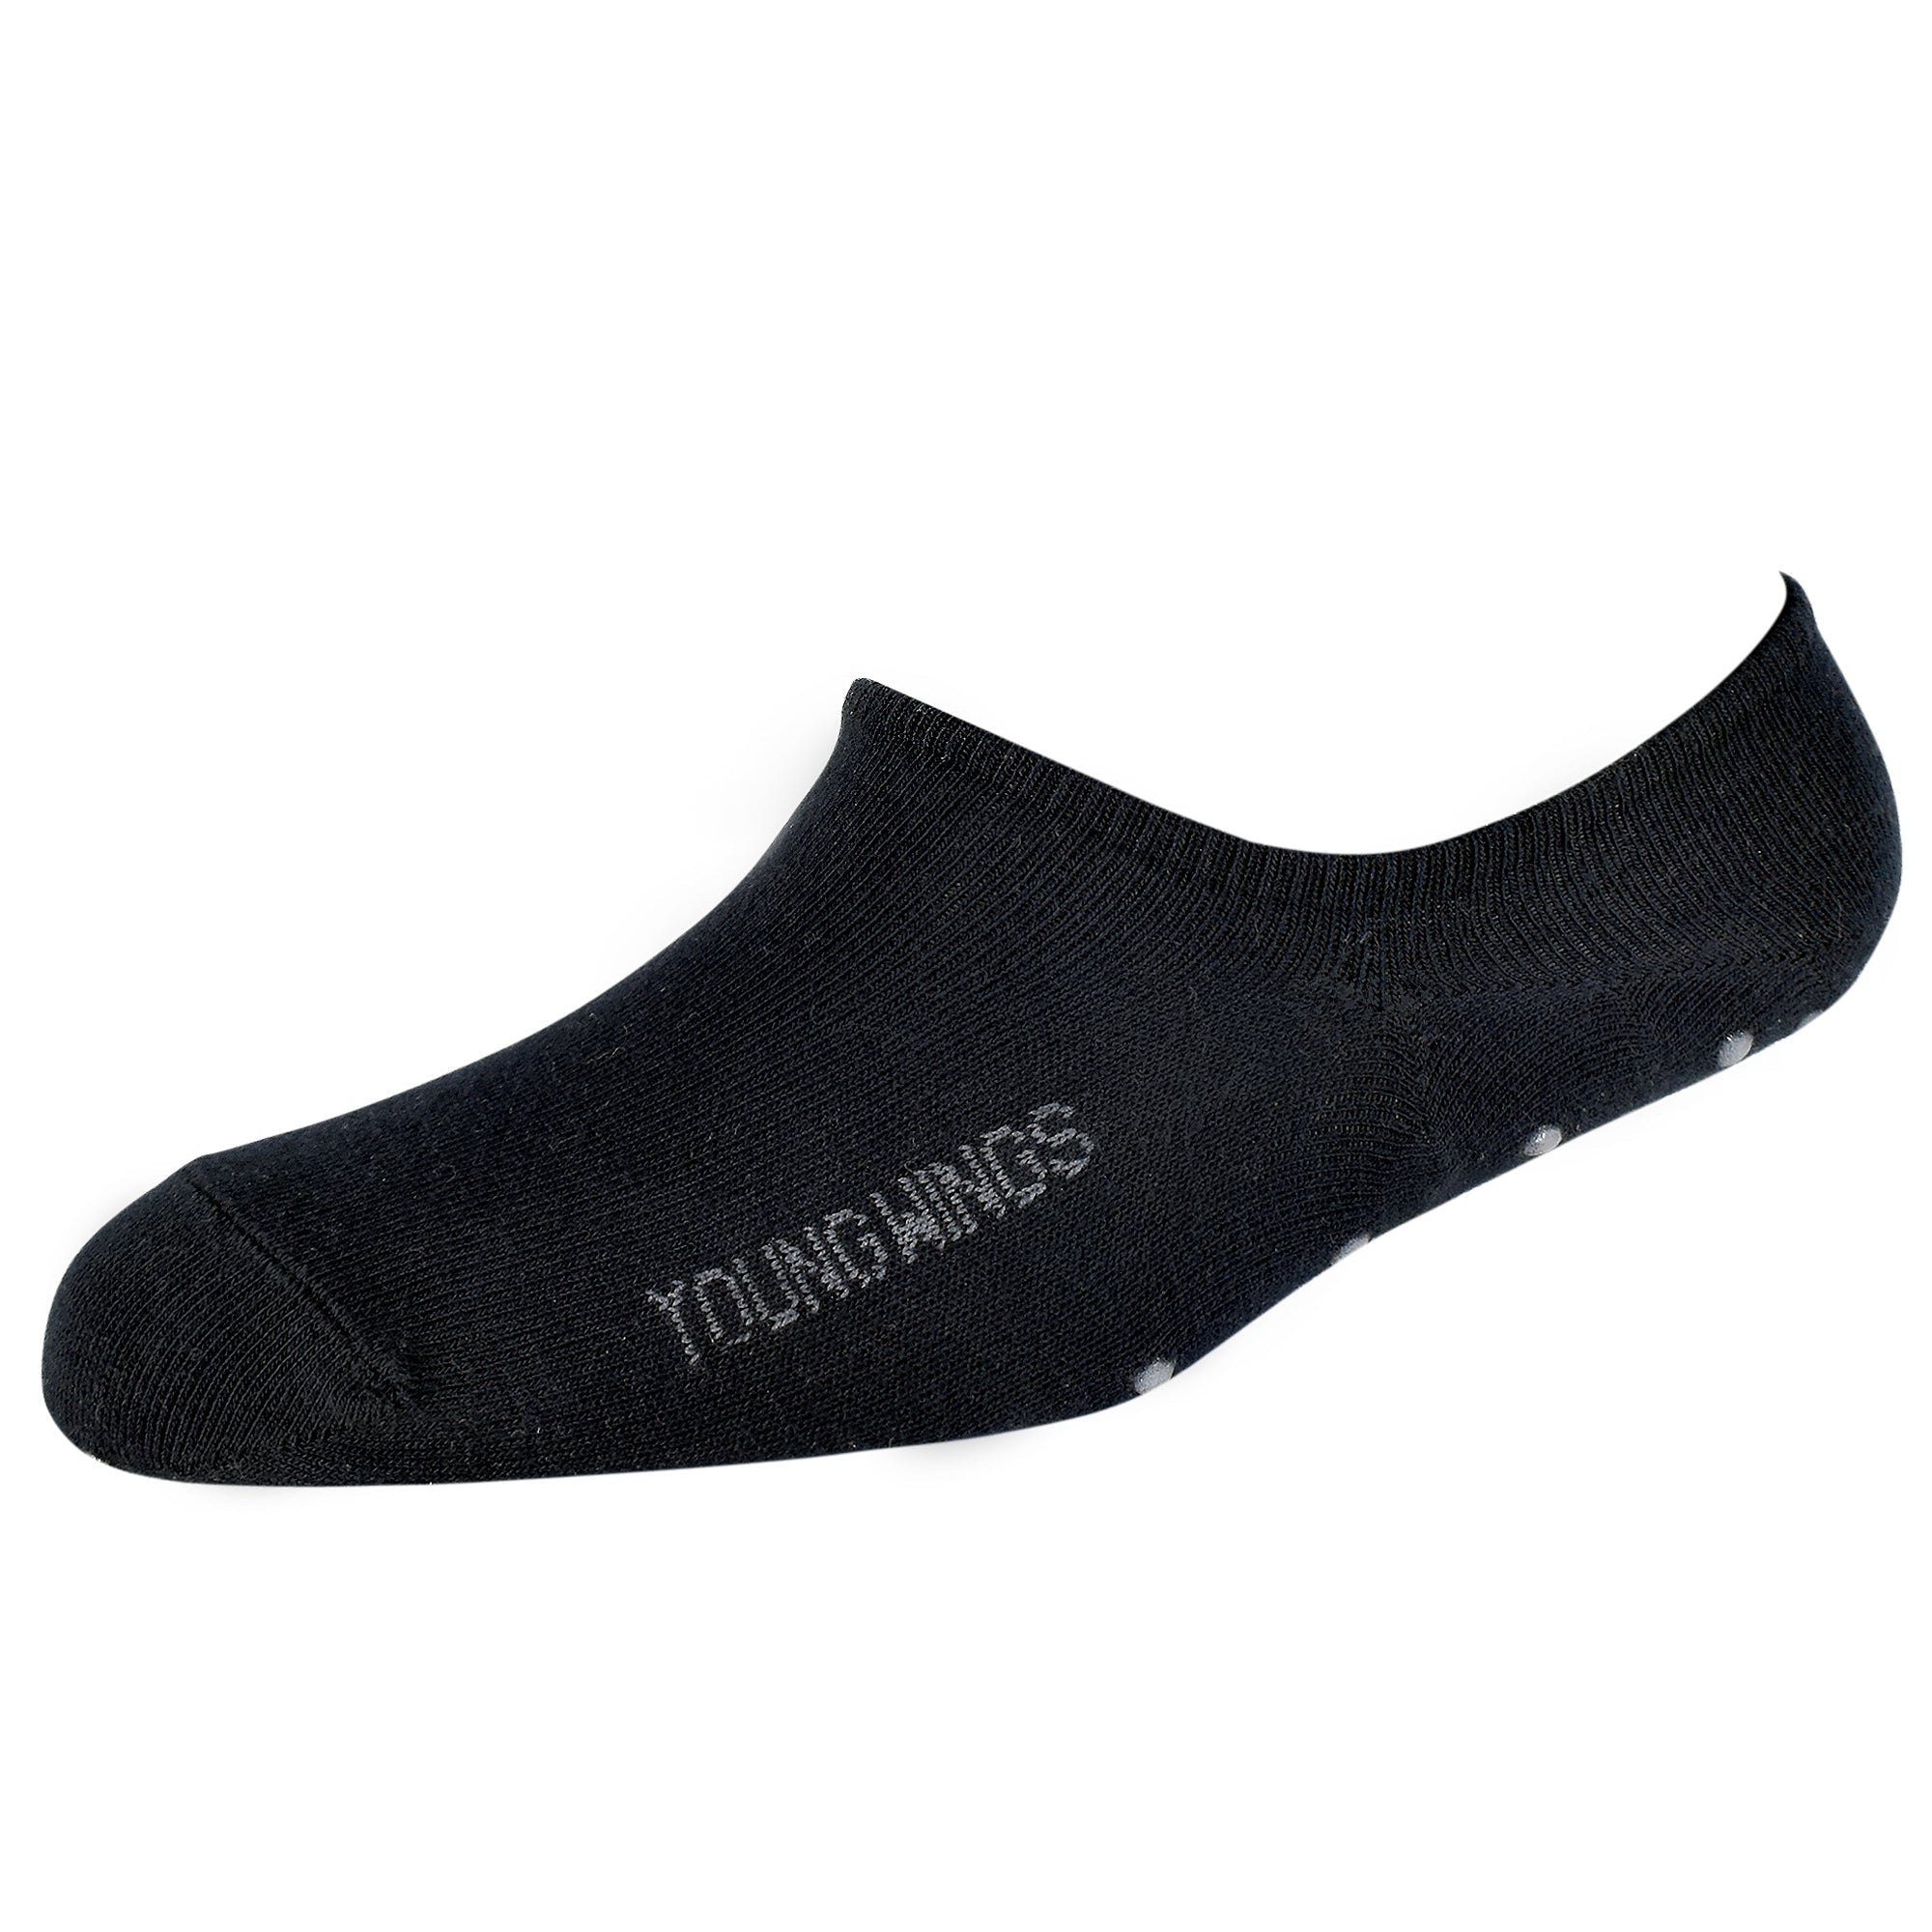 Young Wings Anti-Slip Unisex Home/Yoga Cotton No-Show Socks